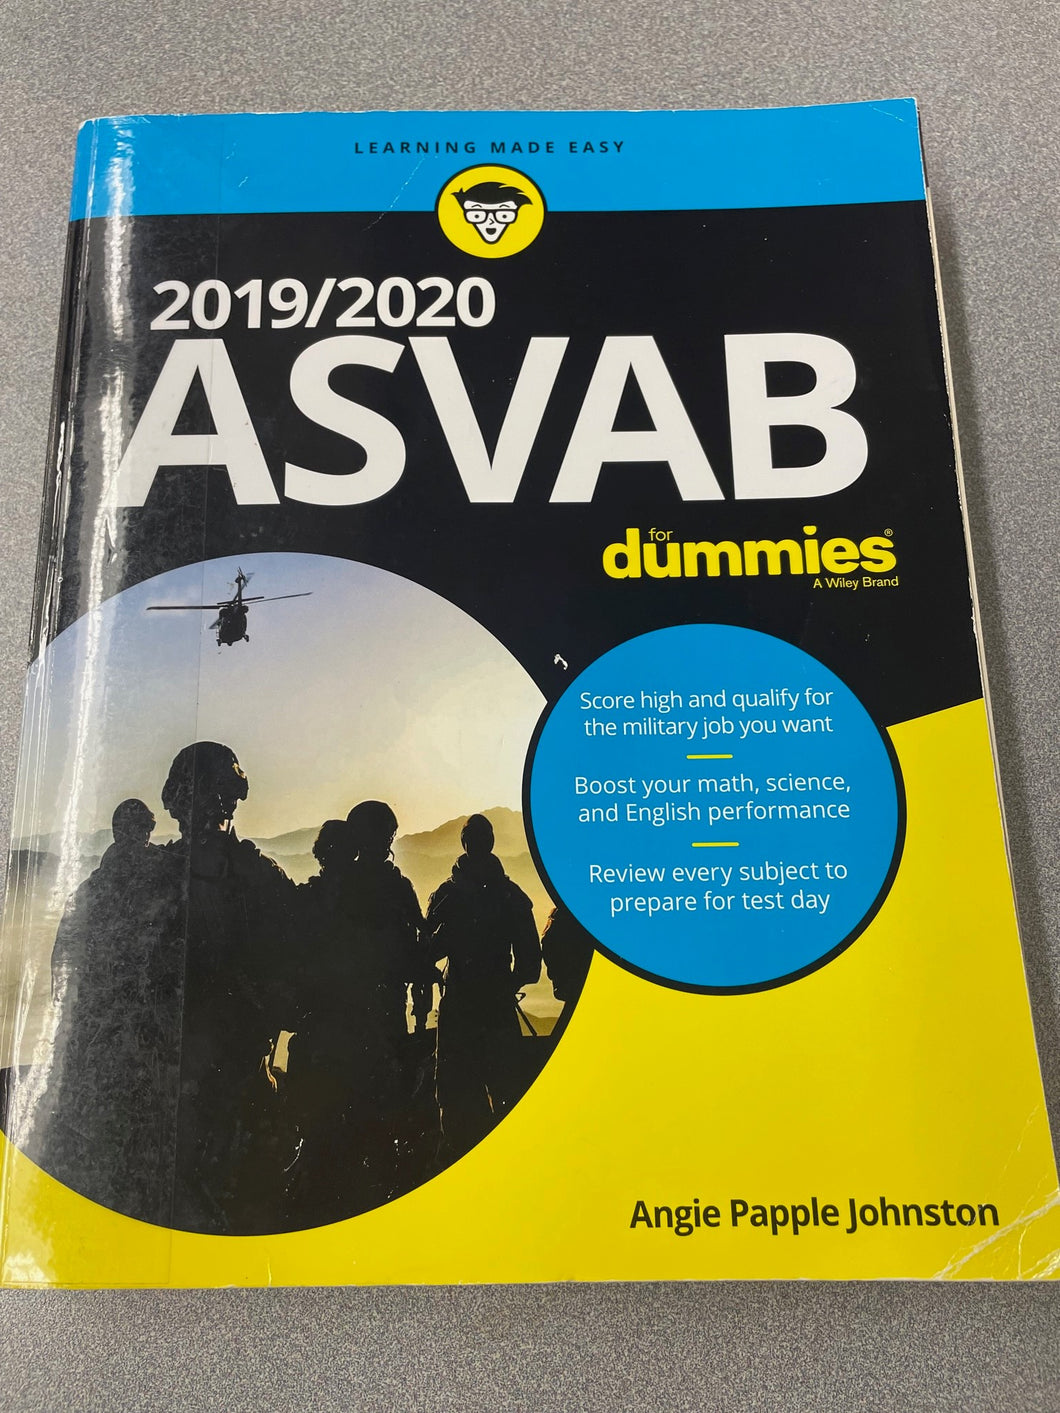 ASVAB for Dummies 2019/2020, Johnston, Angie Papple [2019] TP 10/22